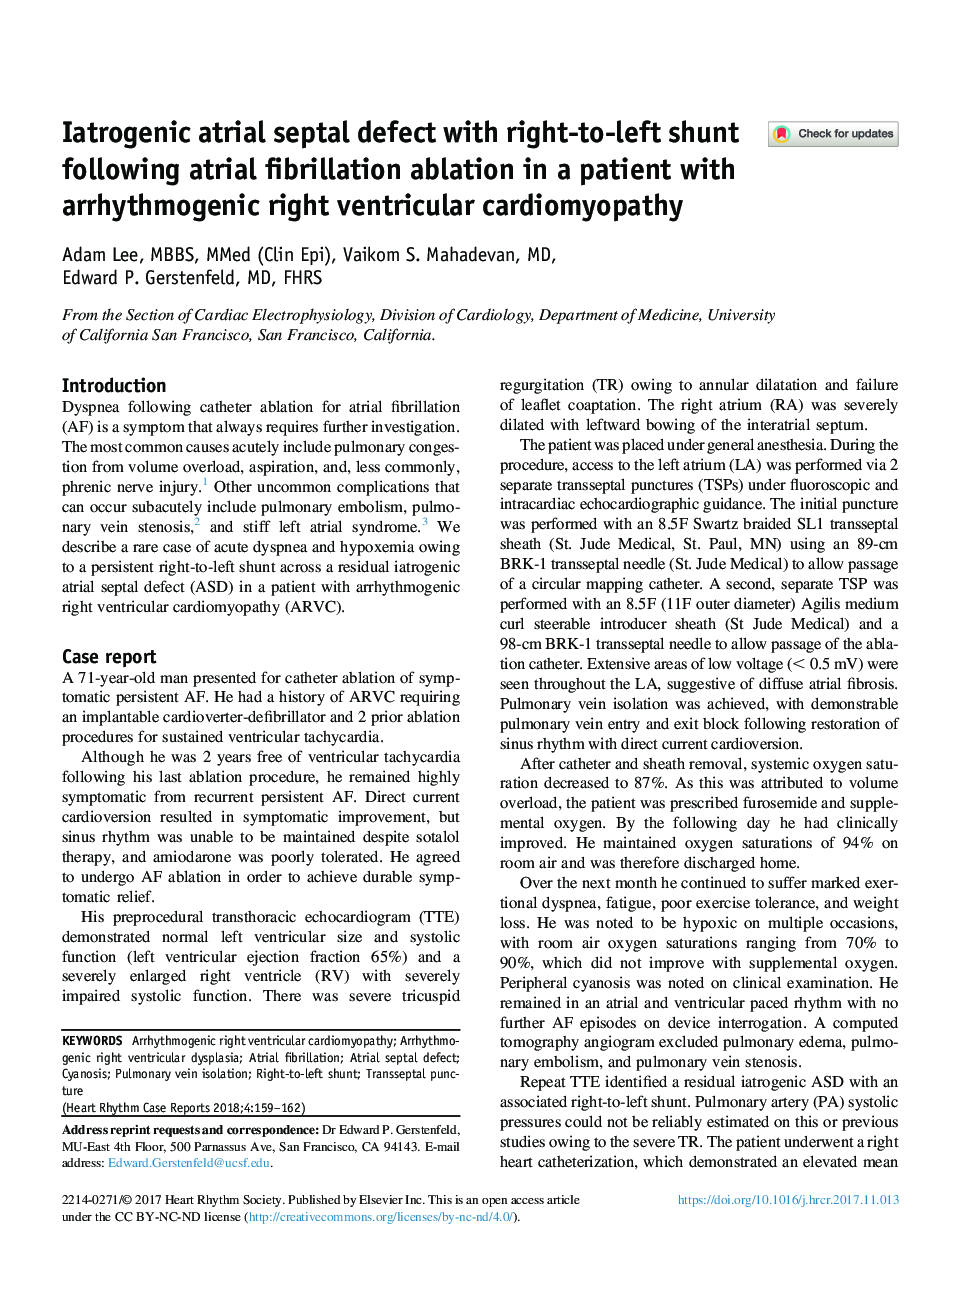 Iatrogenic atrial septal defect with right-to-left shunt following atrial fibrillation ablation in a patient with arrhythmogenic right ventricular cardiomyopathy